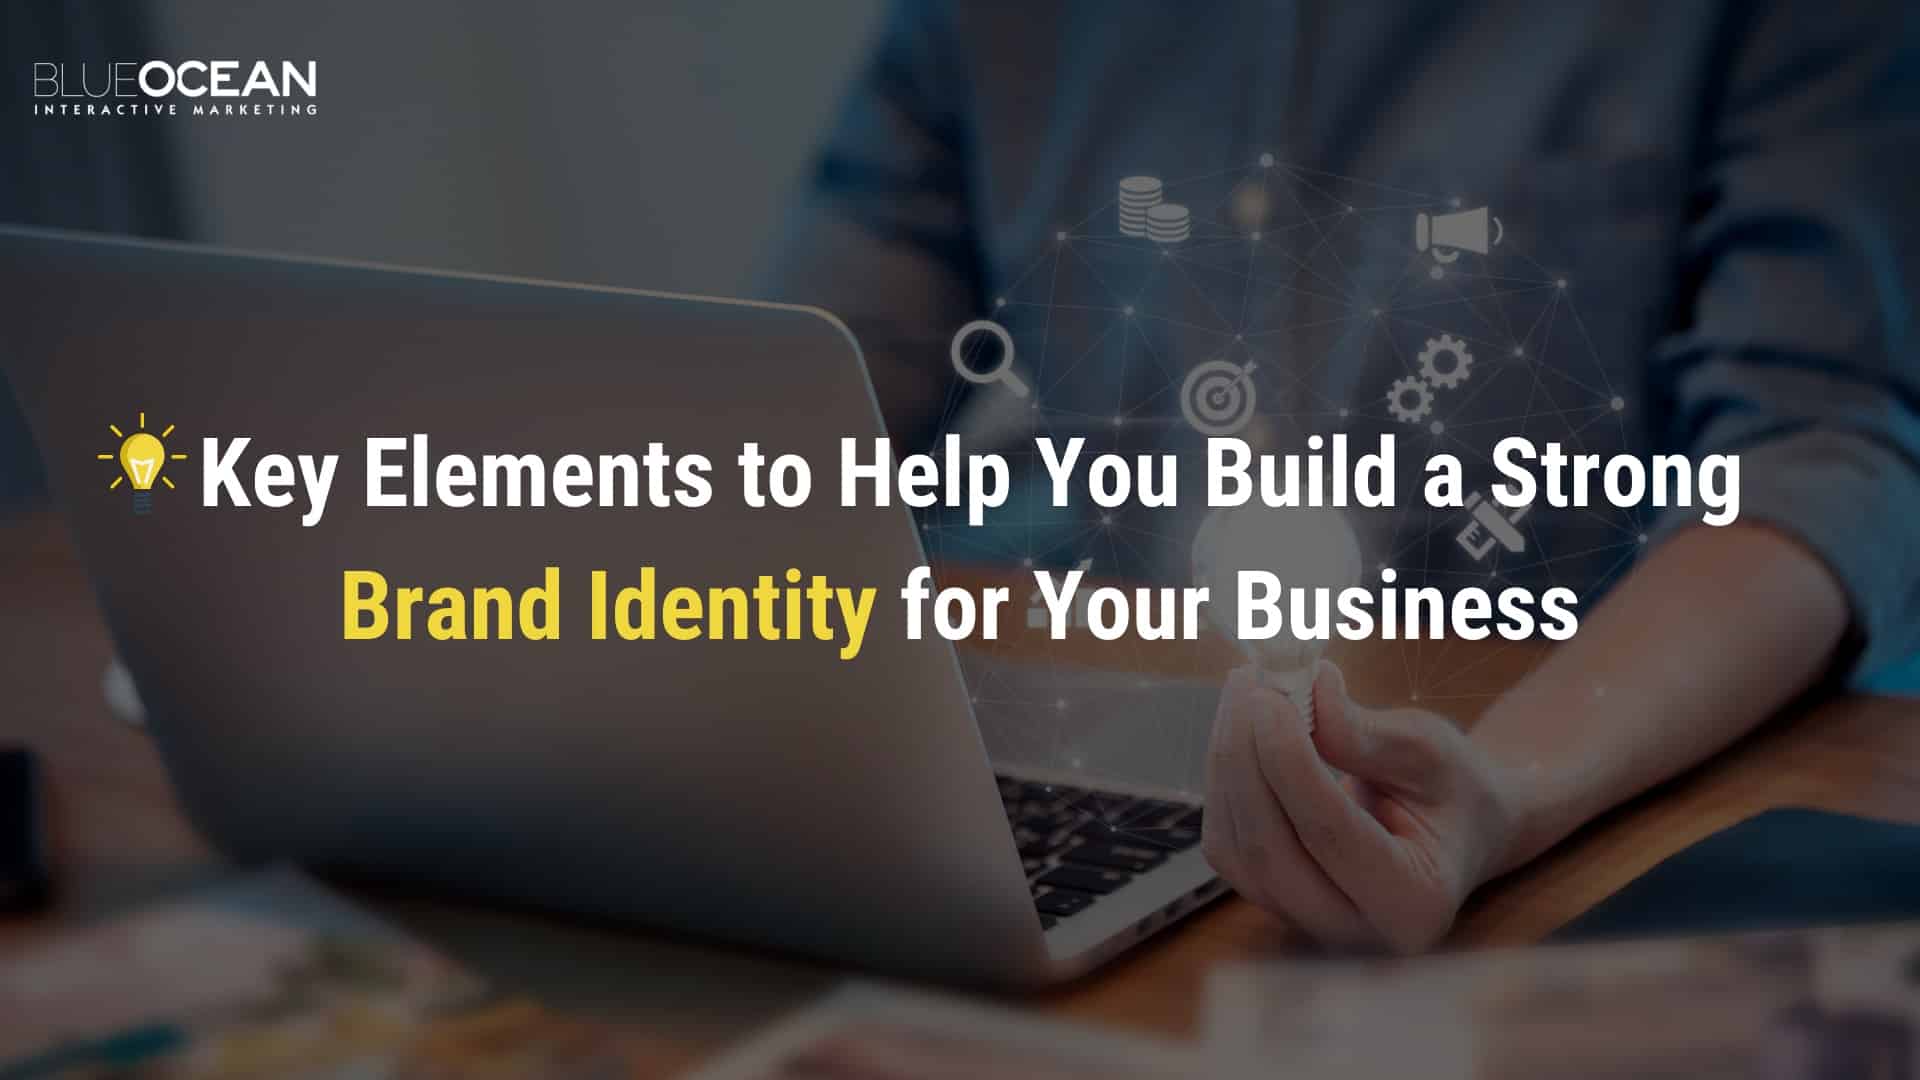 Key Elements to Help You Build a Strong Brand Identity for Your Business